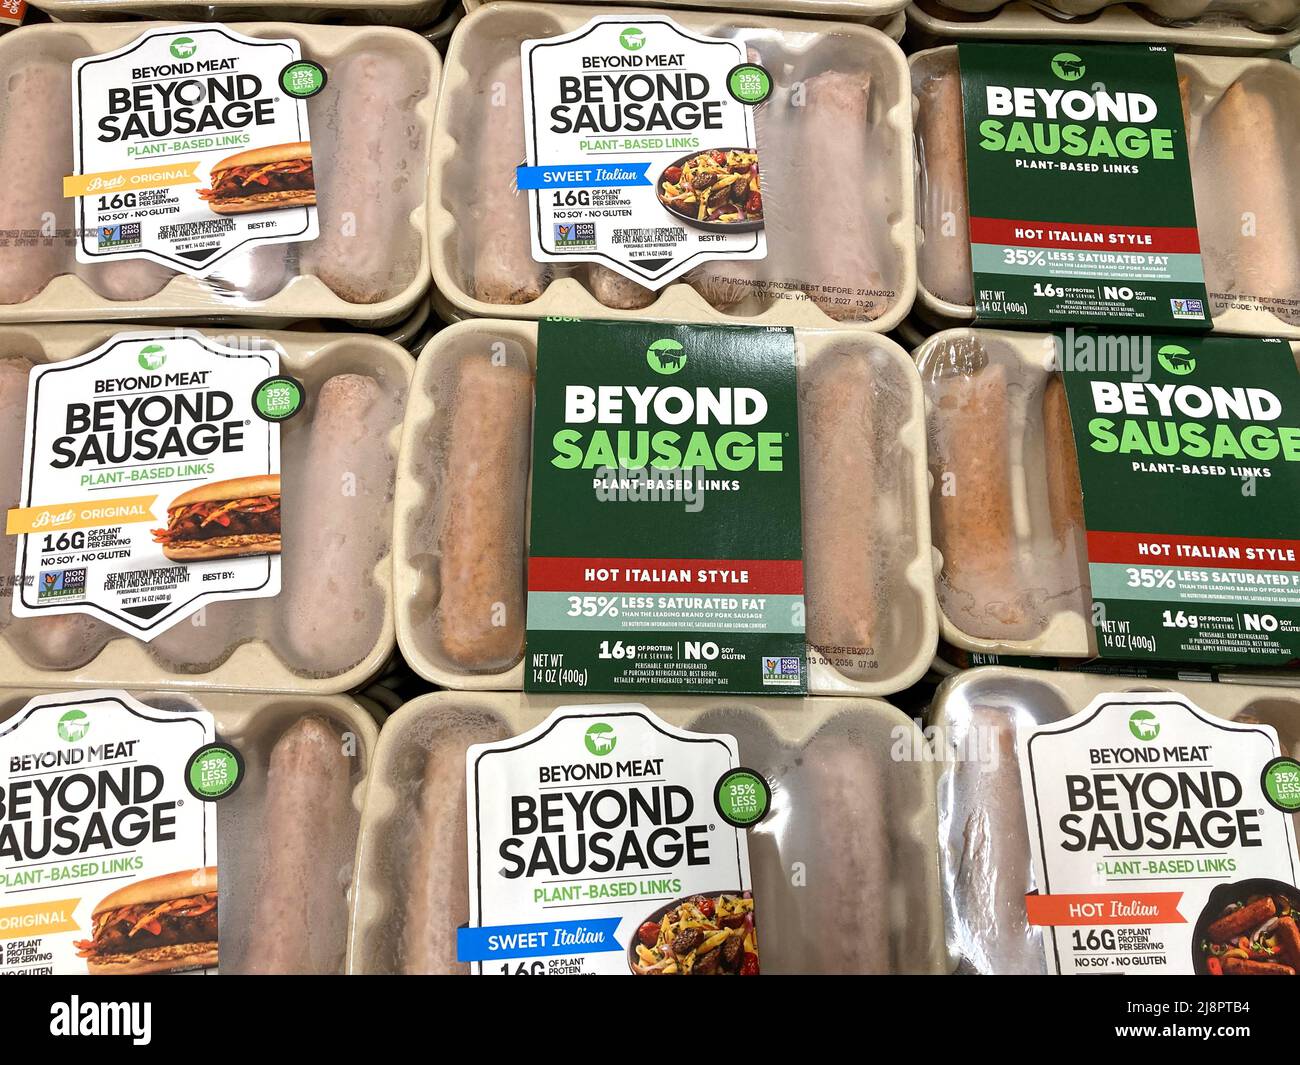 Beyond Meat brand plant-based various Beyond Sausage packages in the meat section of grocery store. - San Jose, California, USA - 2022 Stock Photo